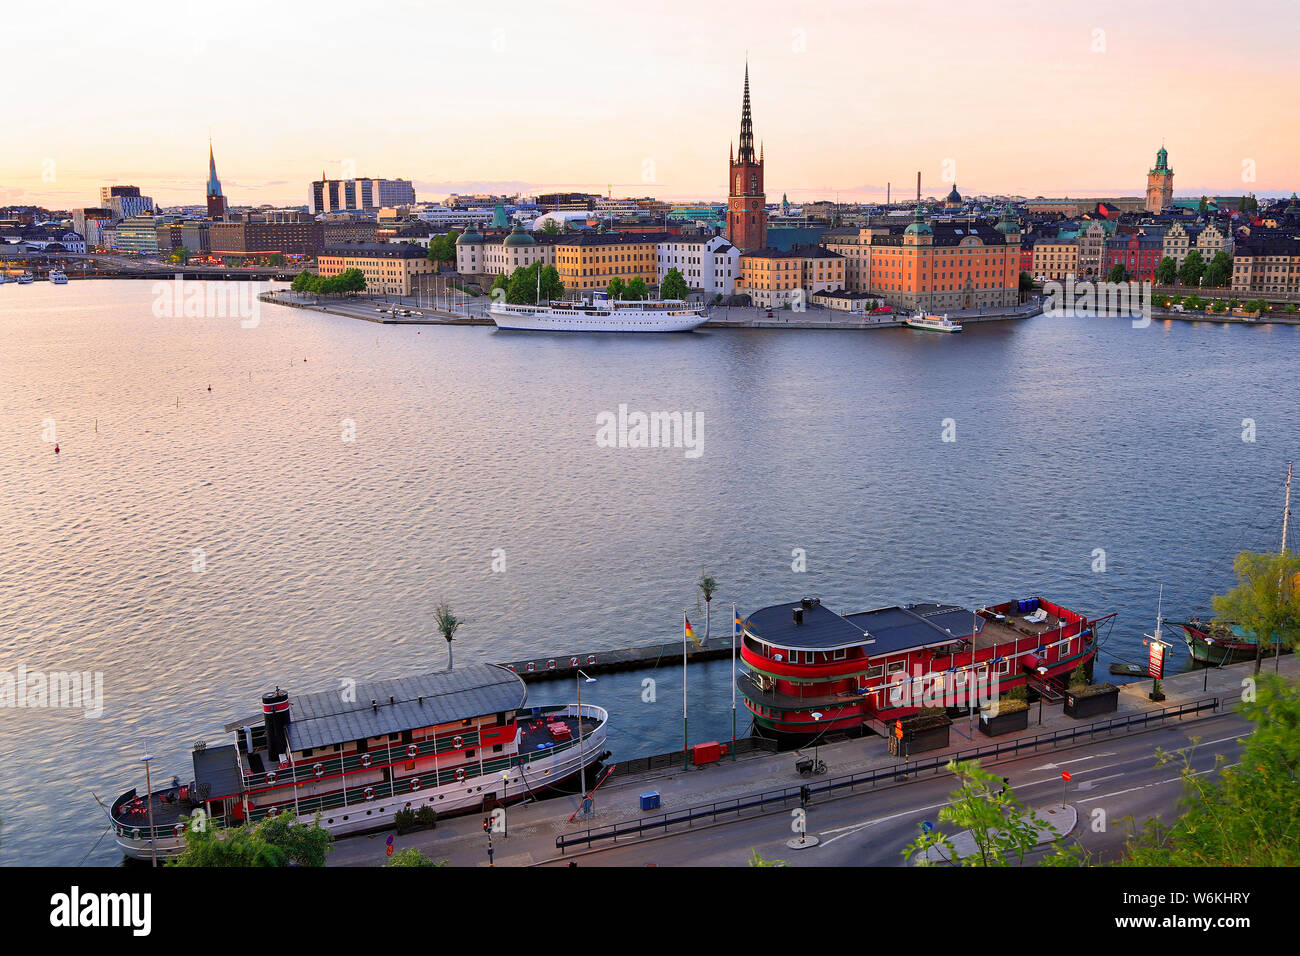 Scenic view of Stockholm's skyline including Gamla Stan illuminated at dusk with colorful boats on the foreground, Sweden Stock Photo